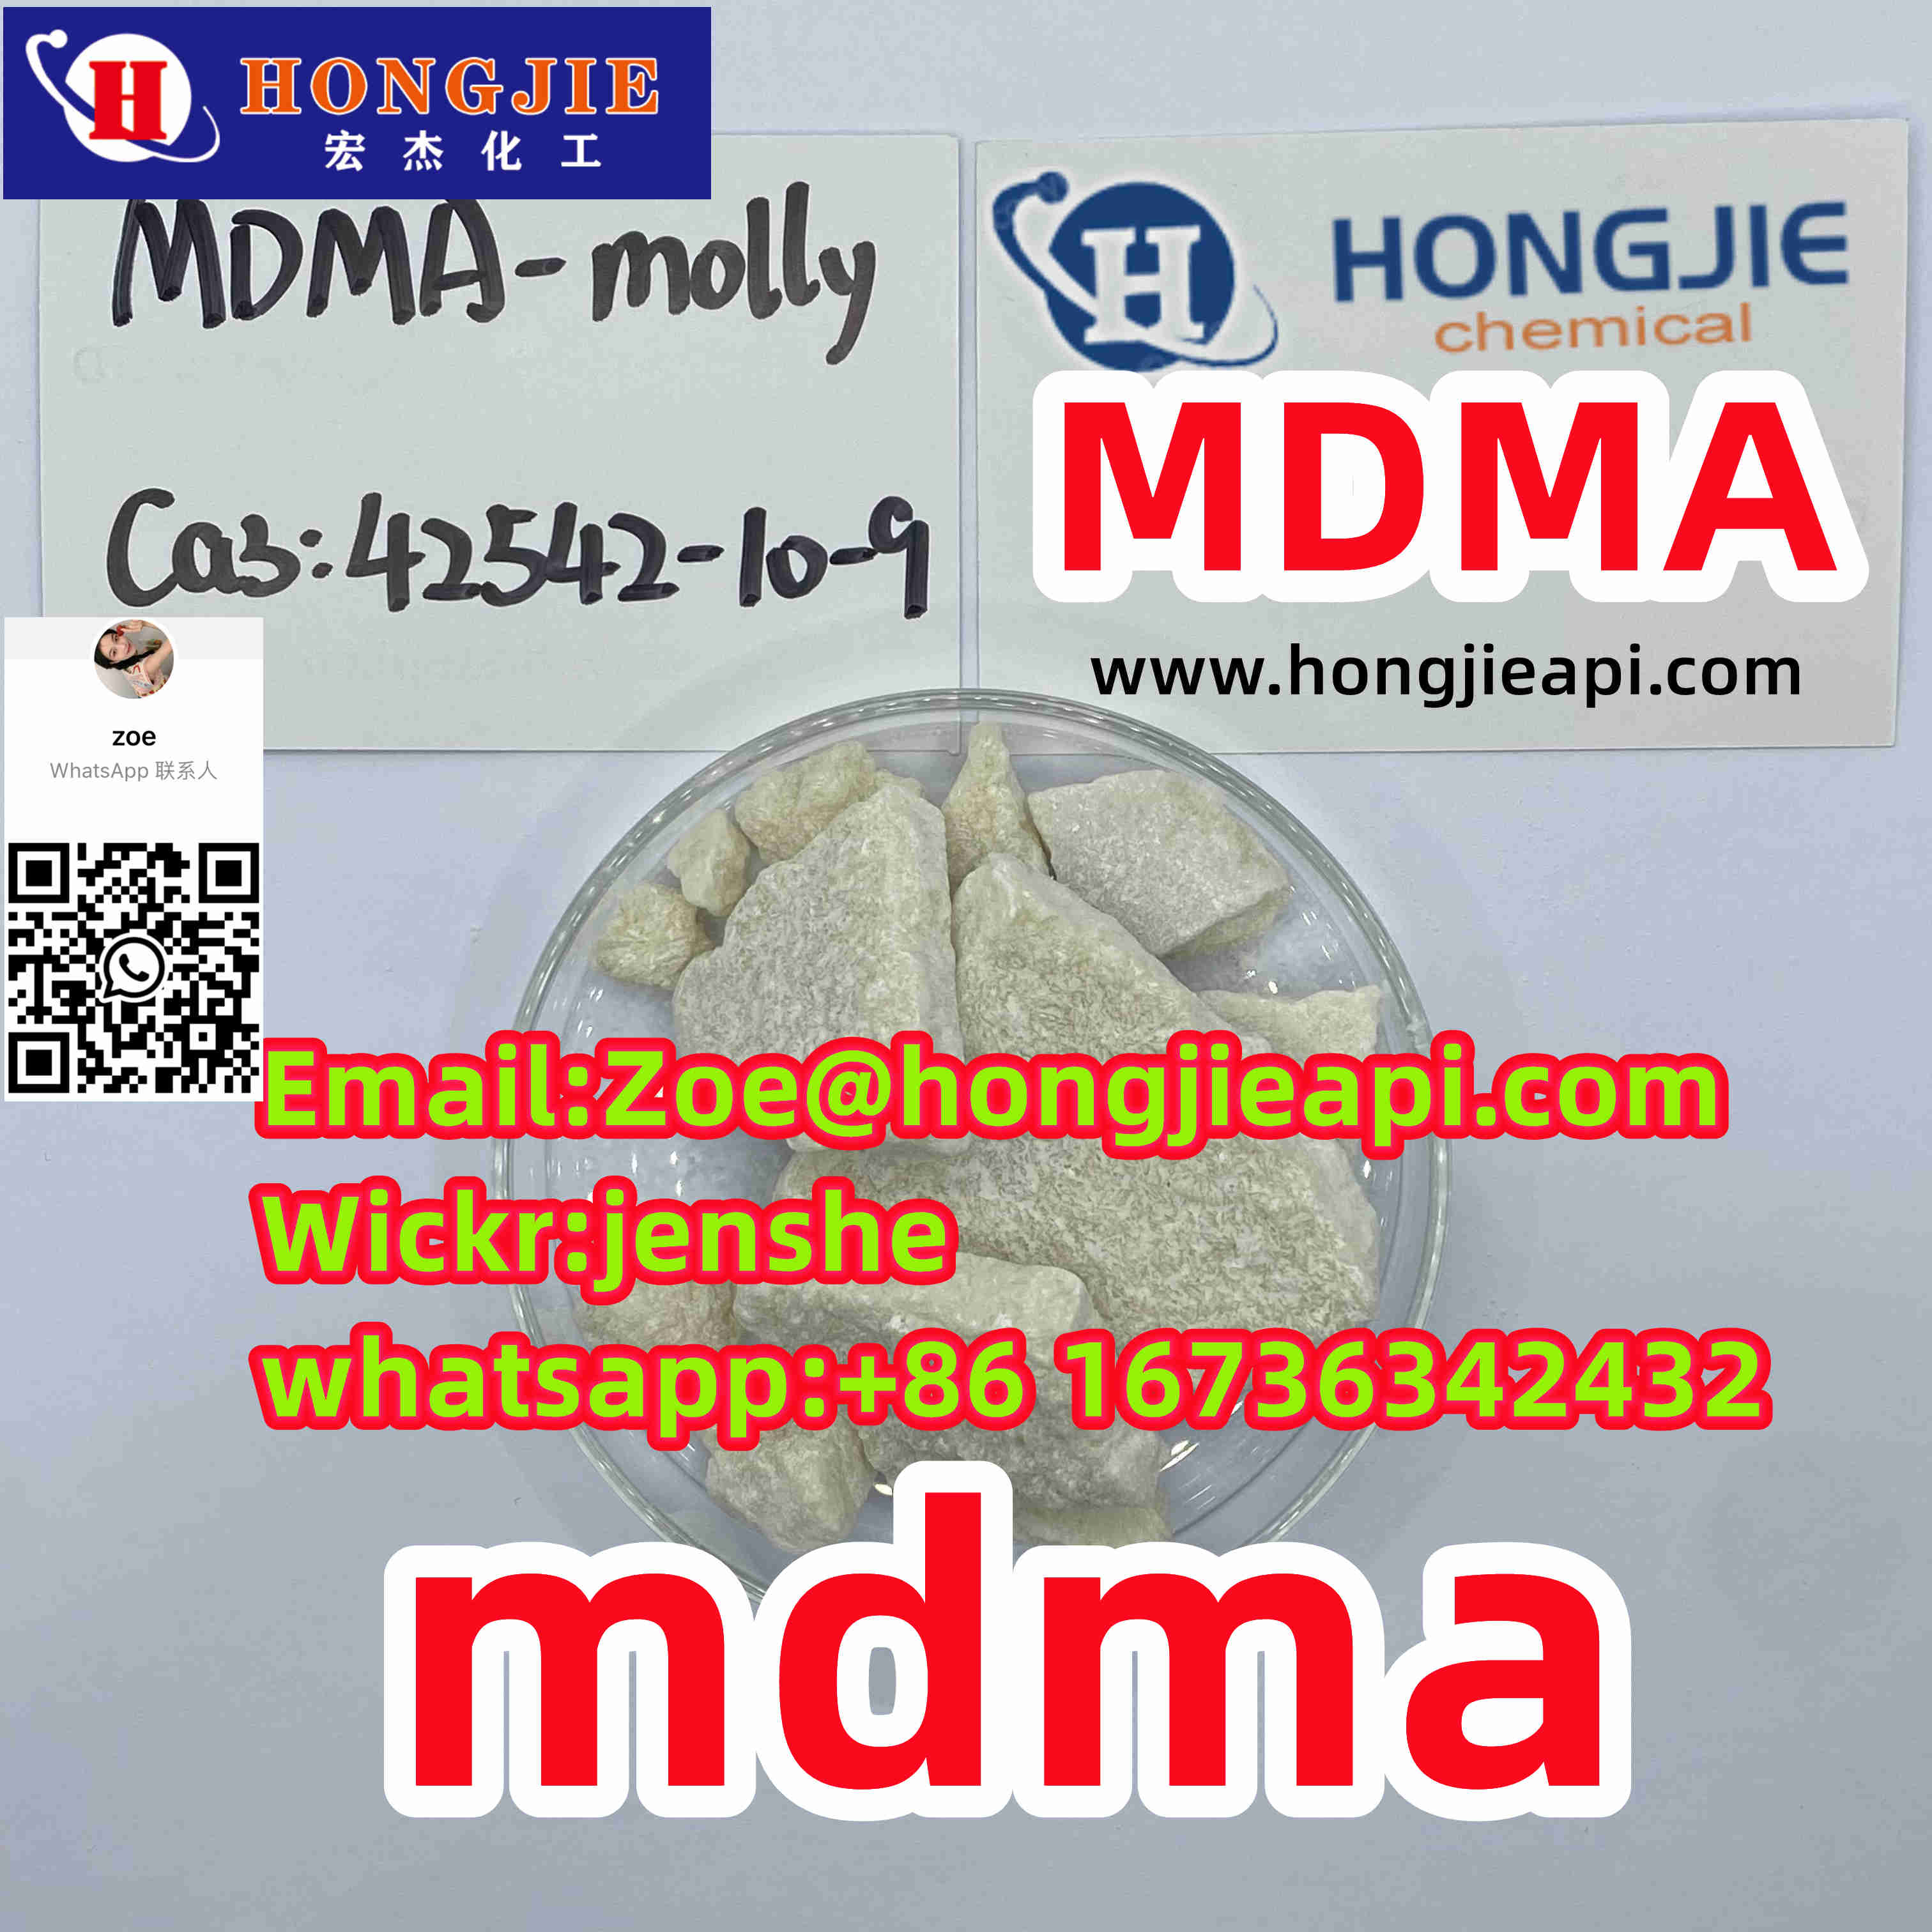 CAS 42542-10-9 MDMA-molly China factory Sell Supply Good Quality